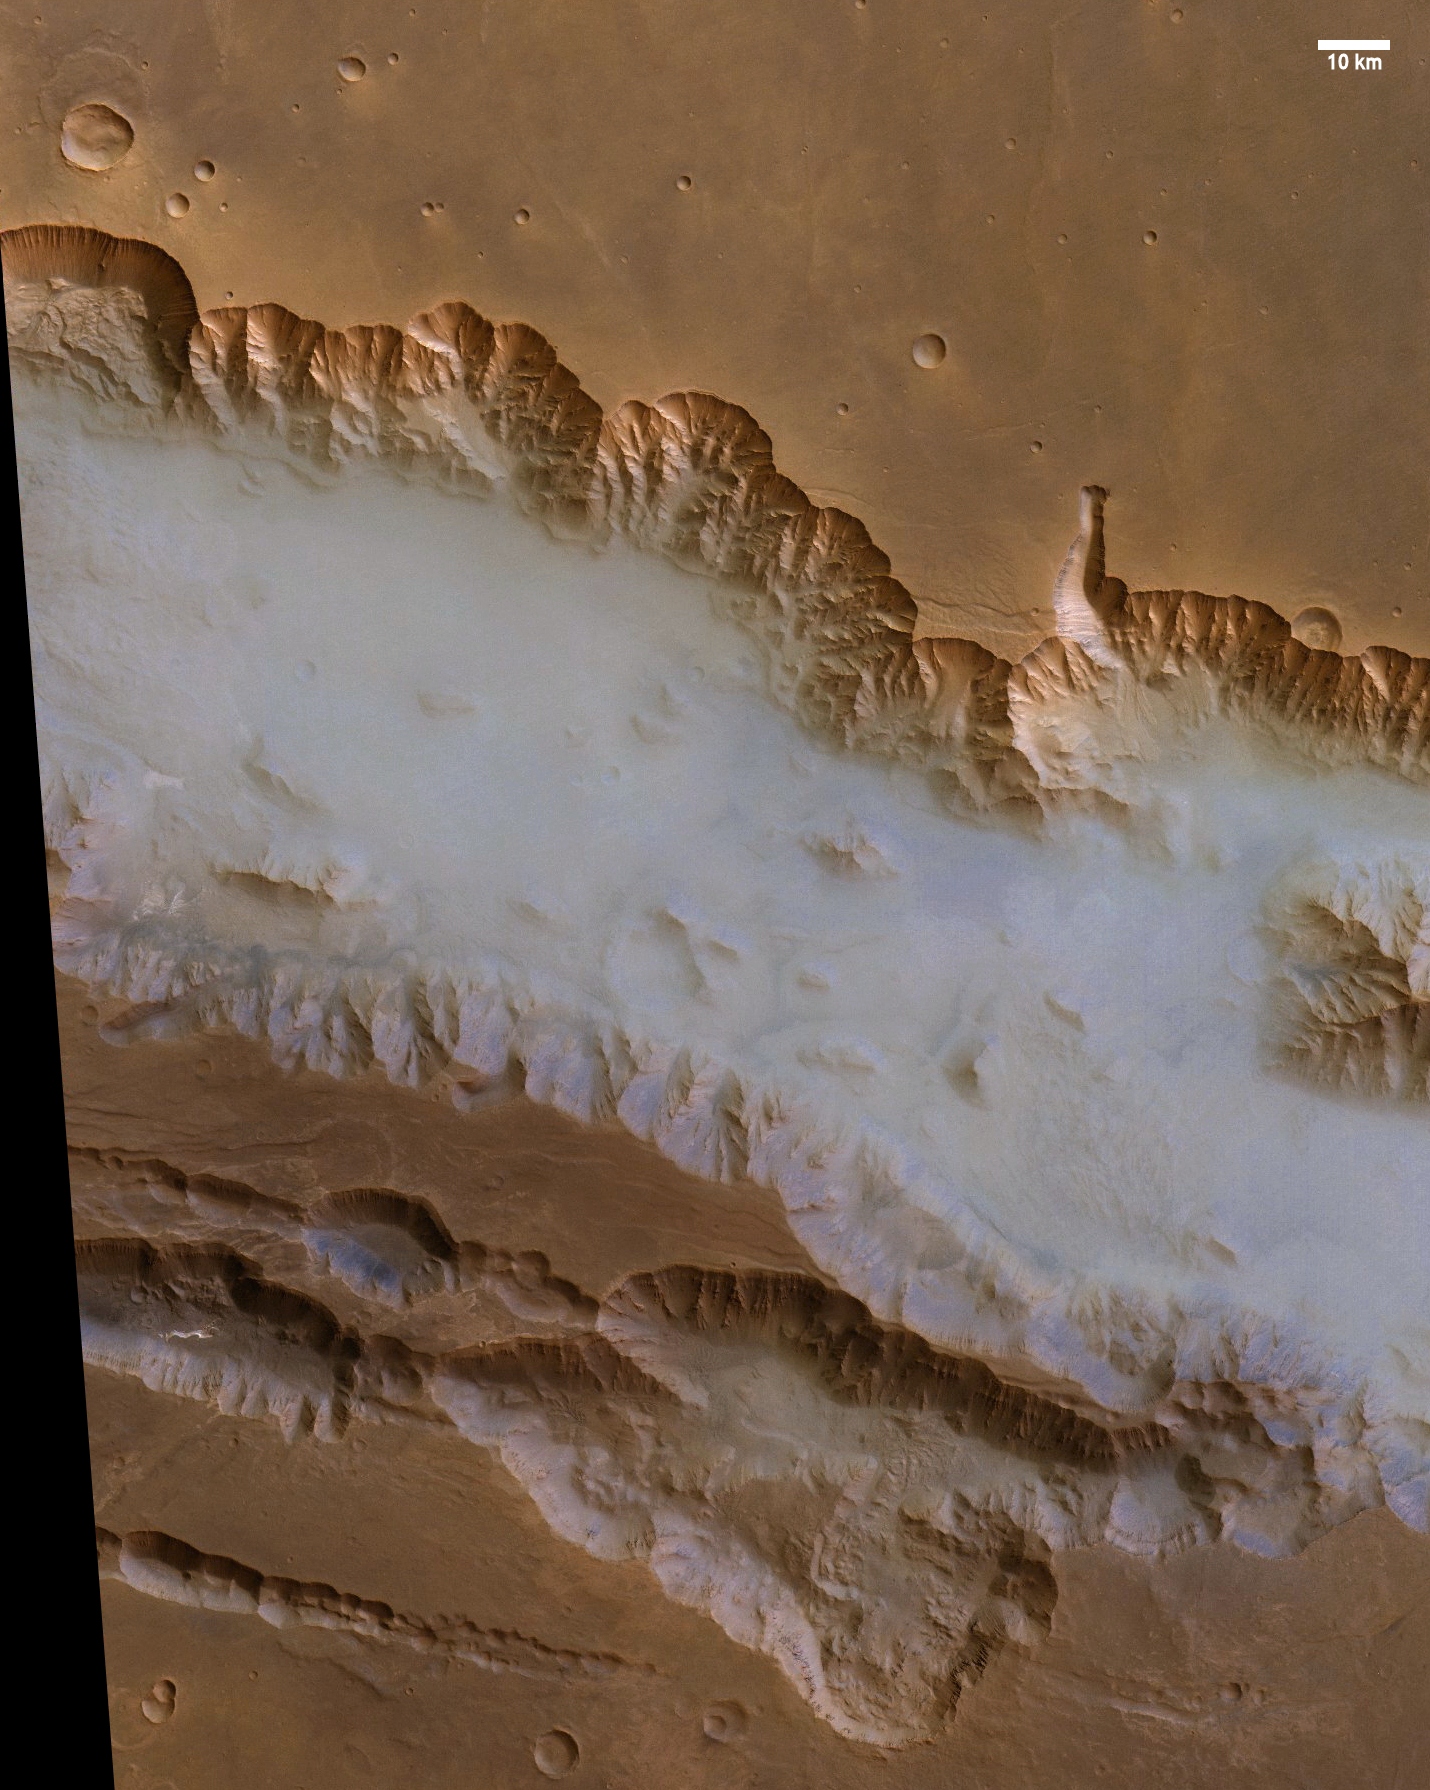 The European Space Agency's Mars Express captured this nebula image in Valles Marineris.